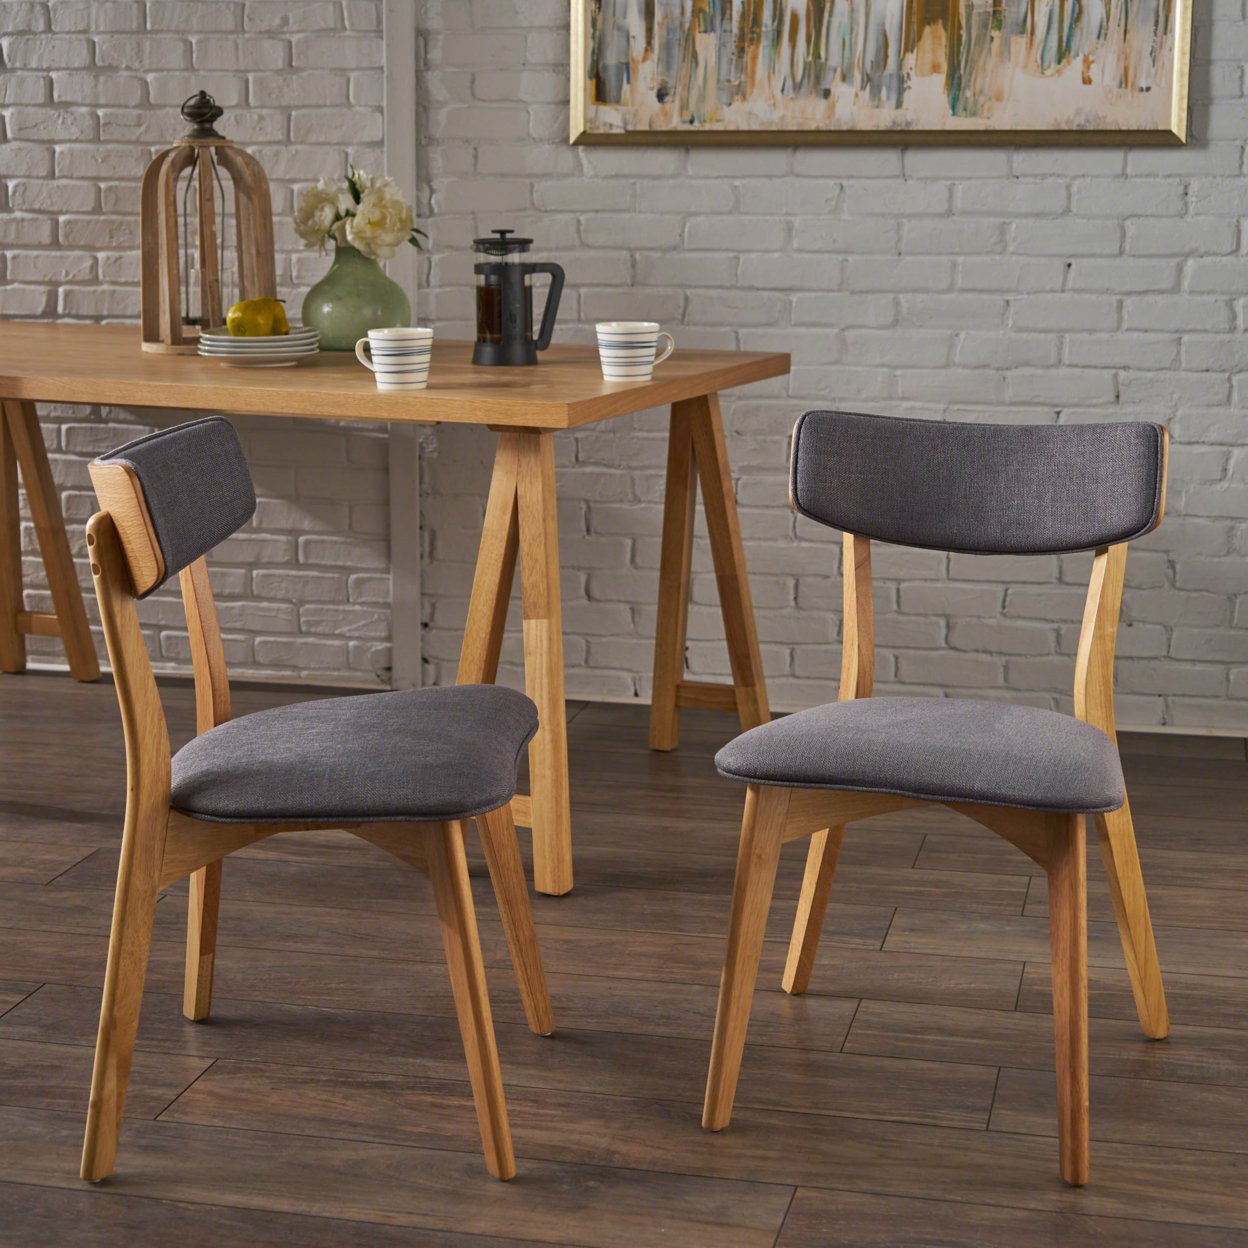 Molly Mid Century Modern Dining Chairs With Rubberwood Frame (Set Of 2) - Dark Gray/Natural Oak